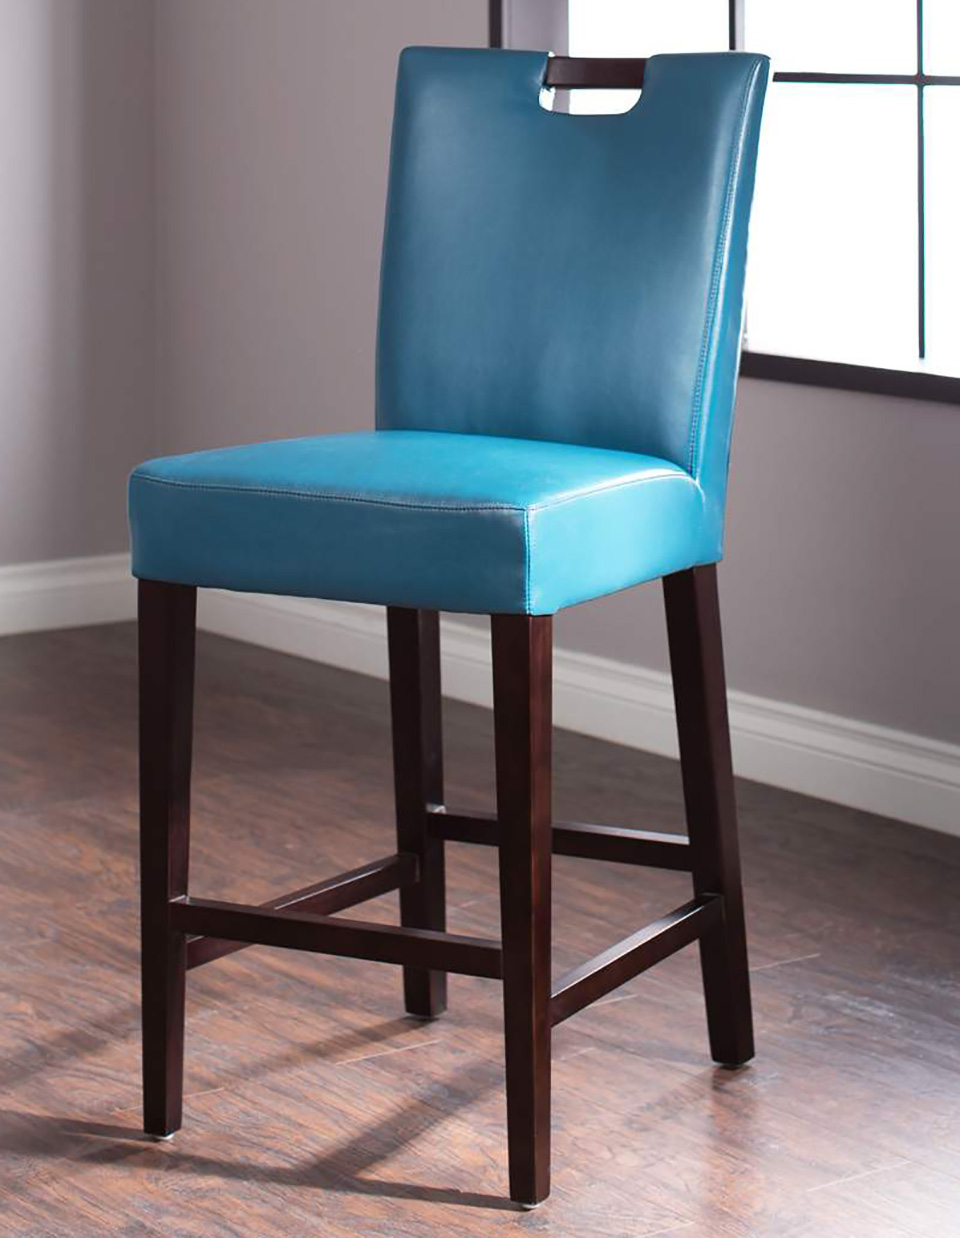 The Right Height Jerome S Furniture, Teal Leather Counter Stools